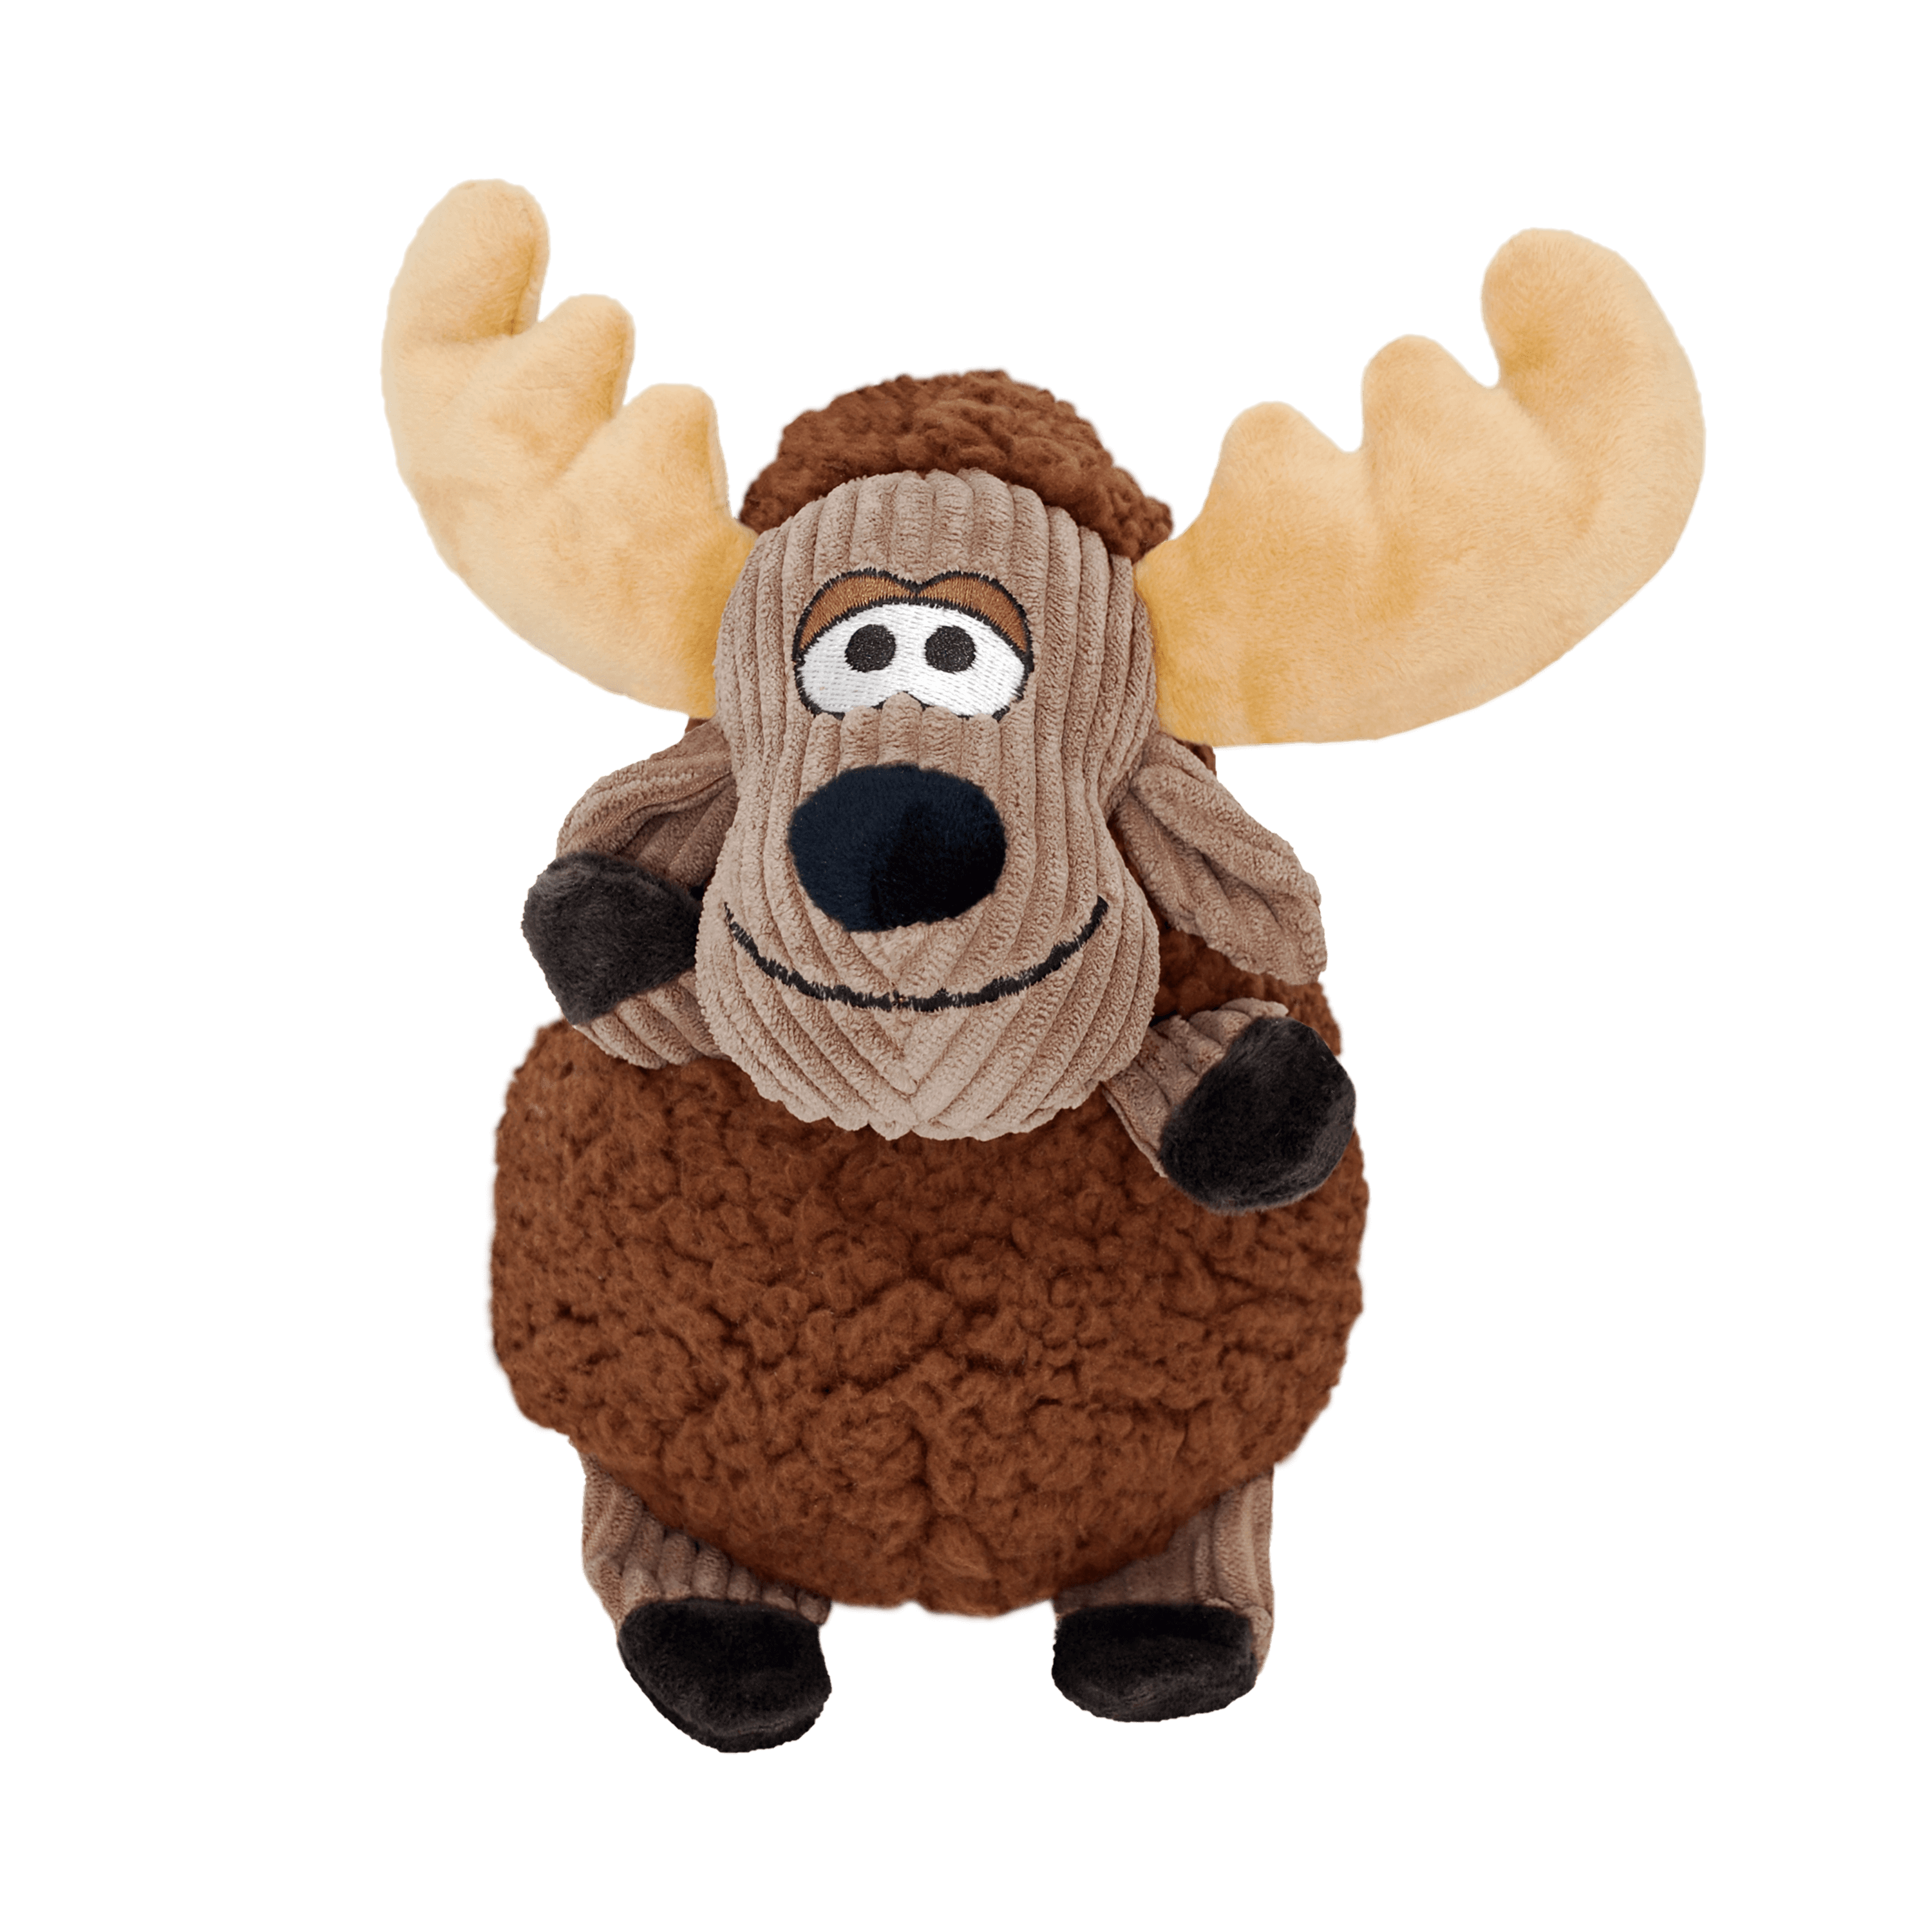 KONG - Sherps Floofs Mooses (Dog Toy)